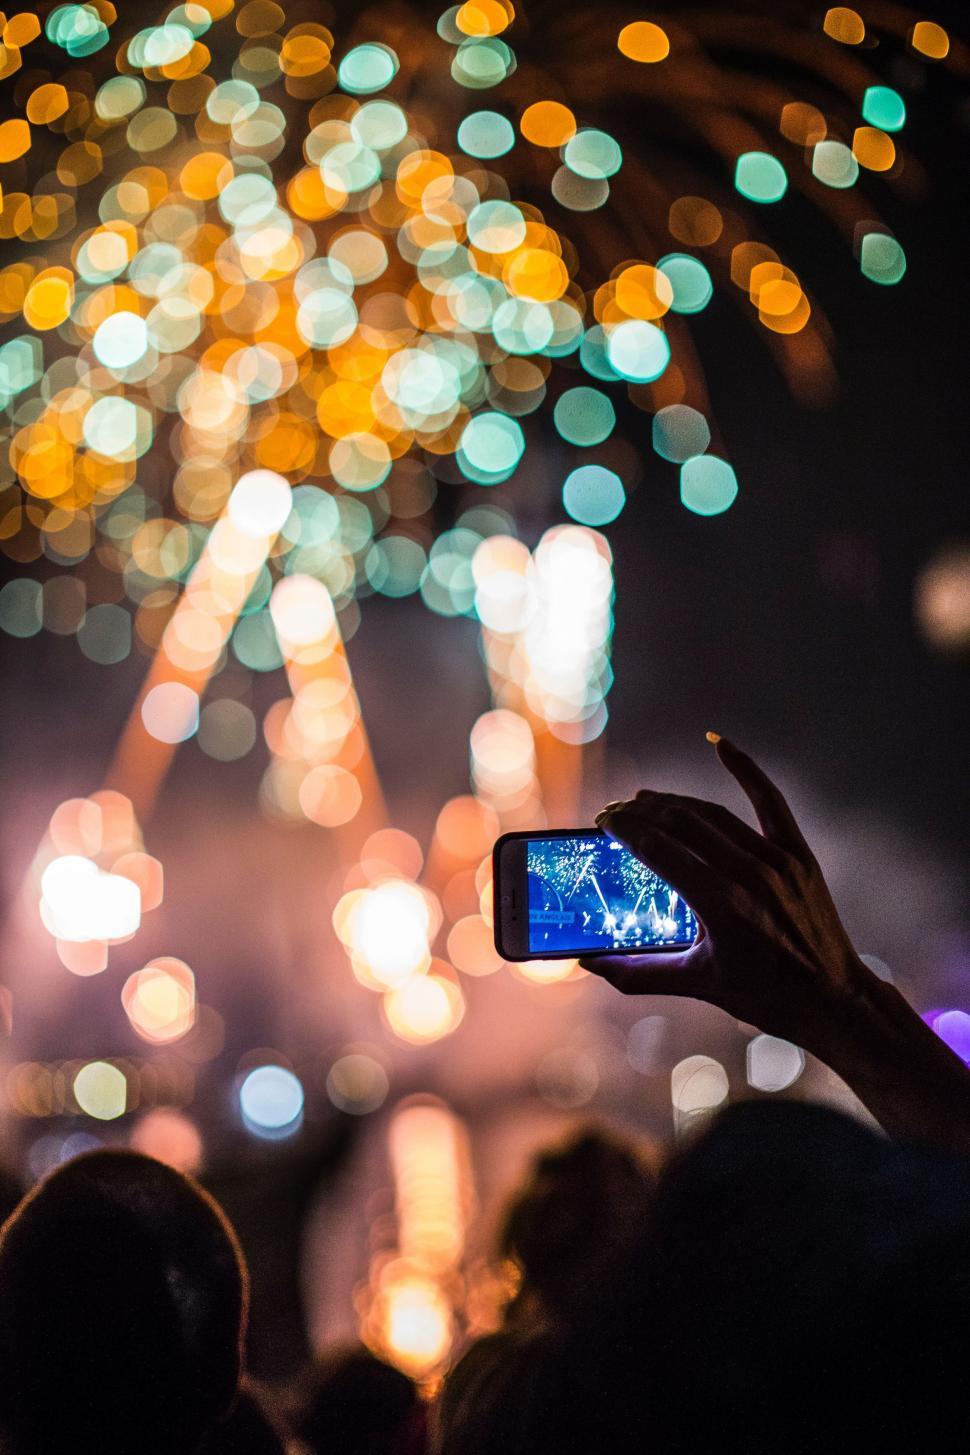 Free Image of Person Capturing Fireworks Display With Camera 